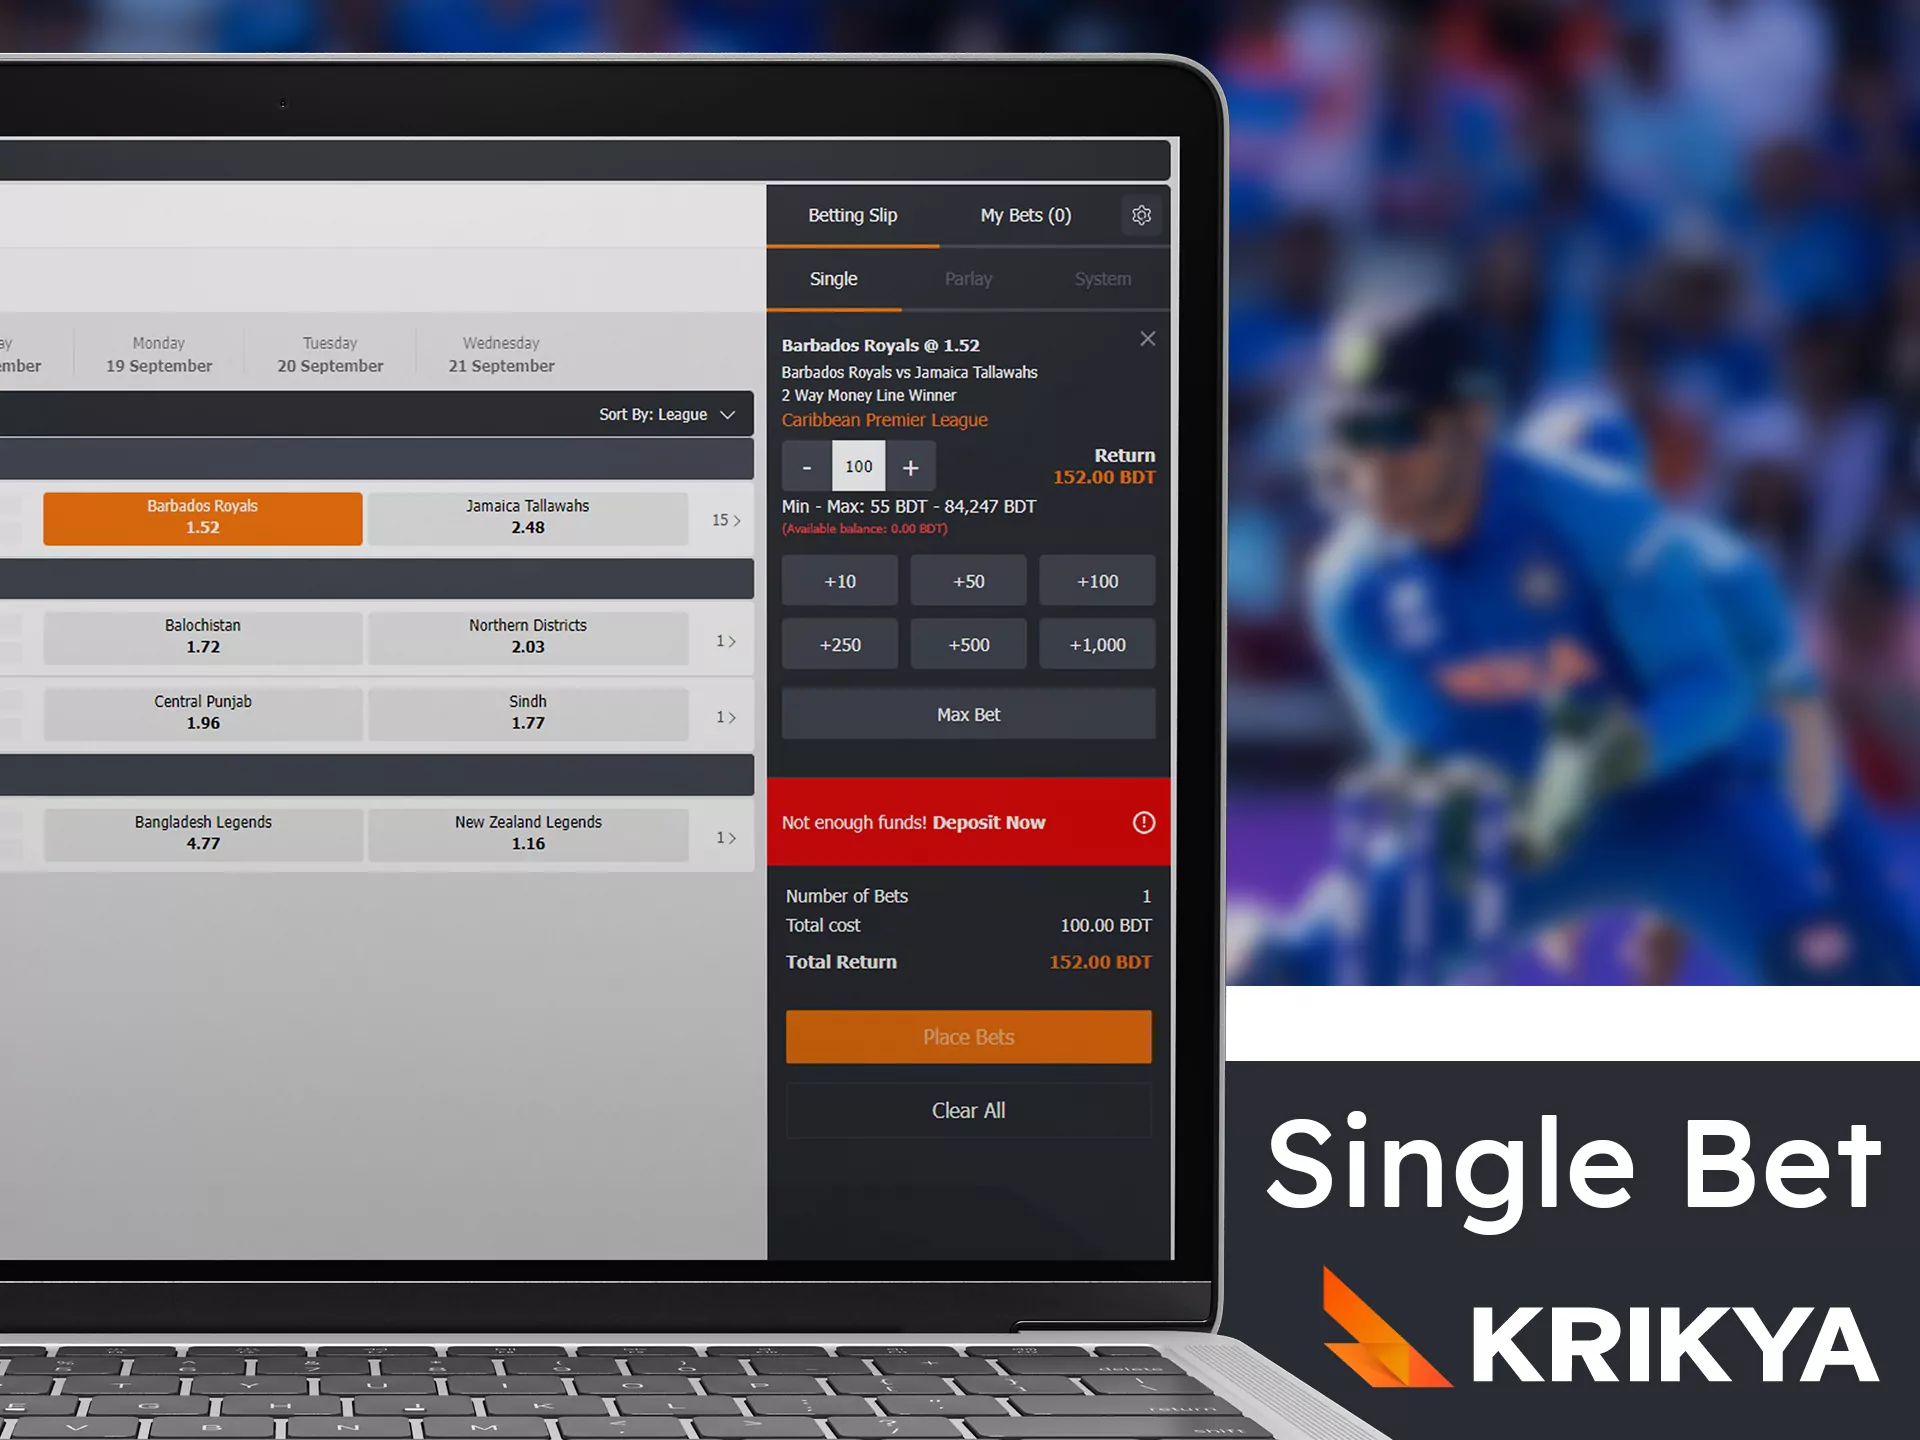 Make simple bets with low risks at Krikya.